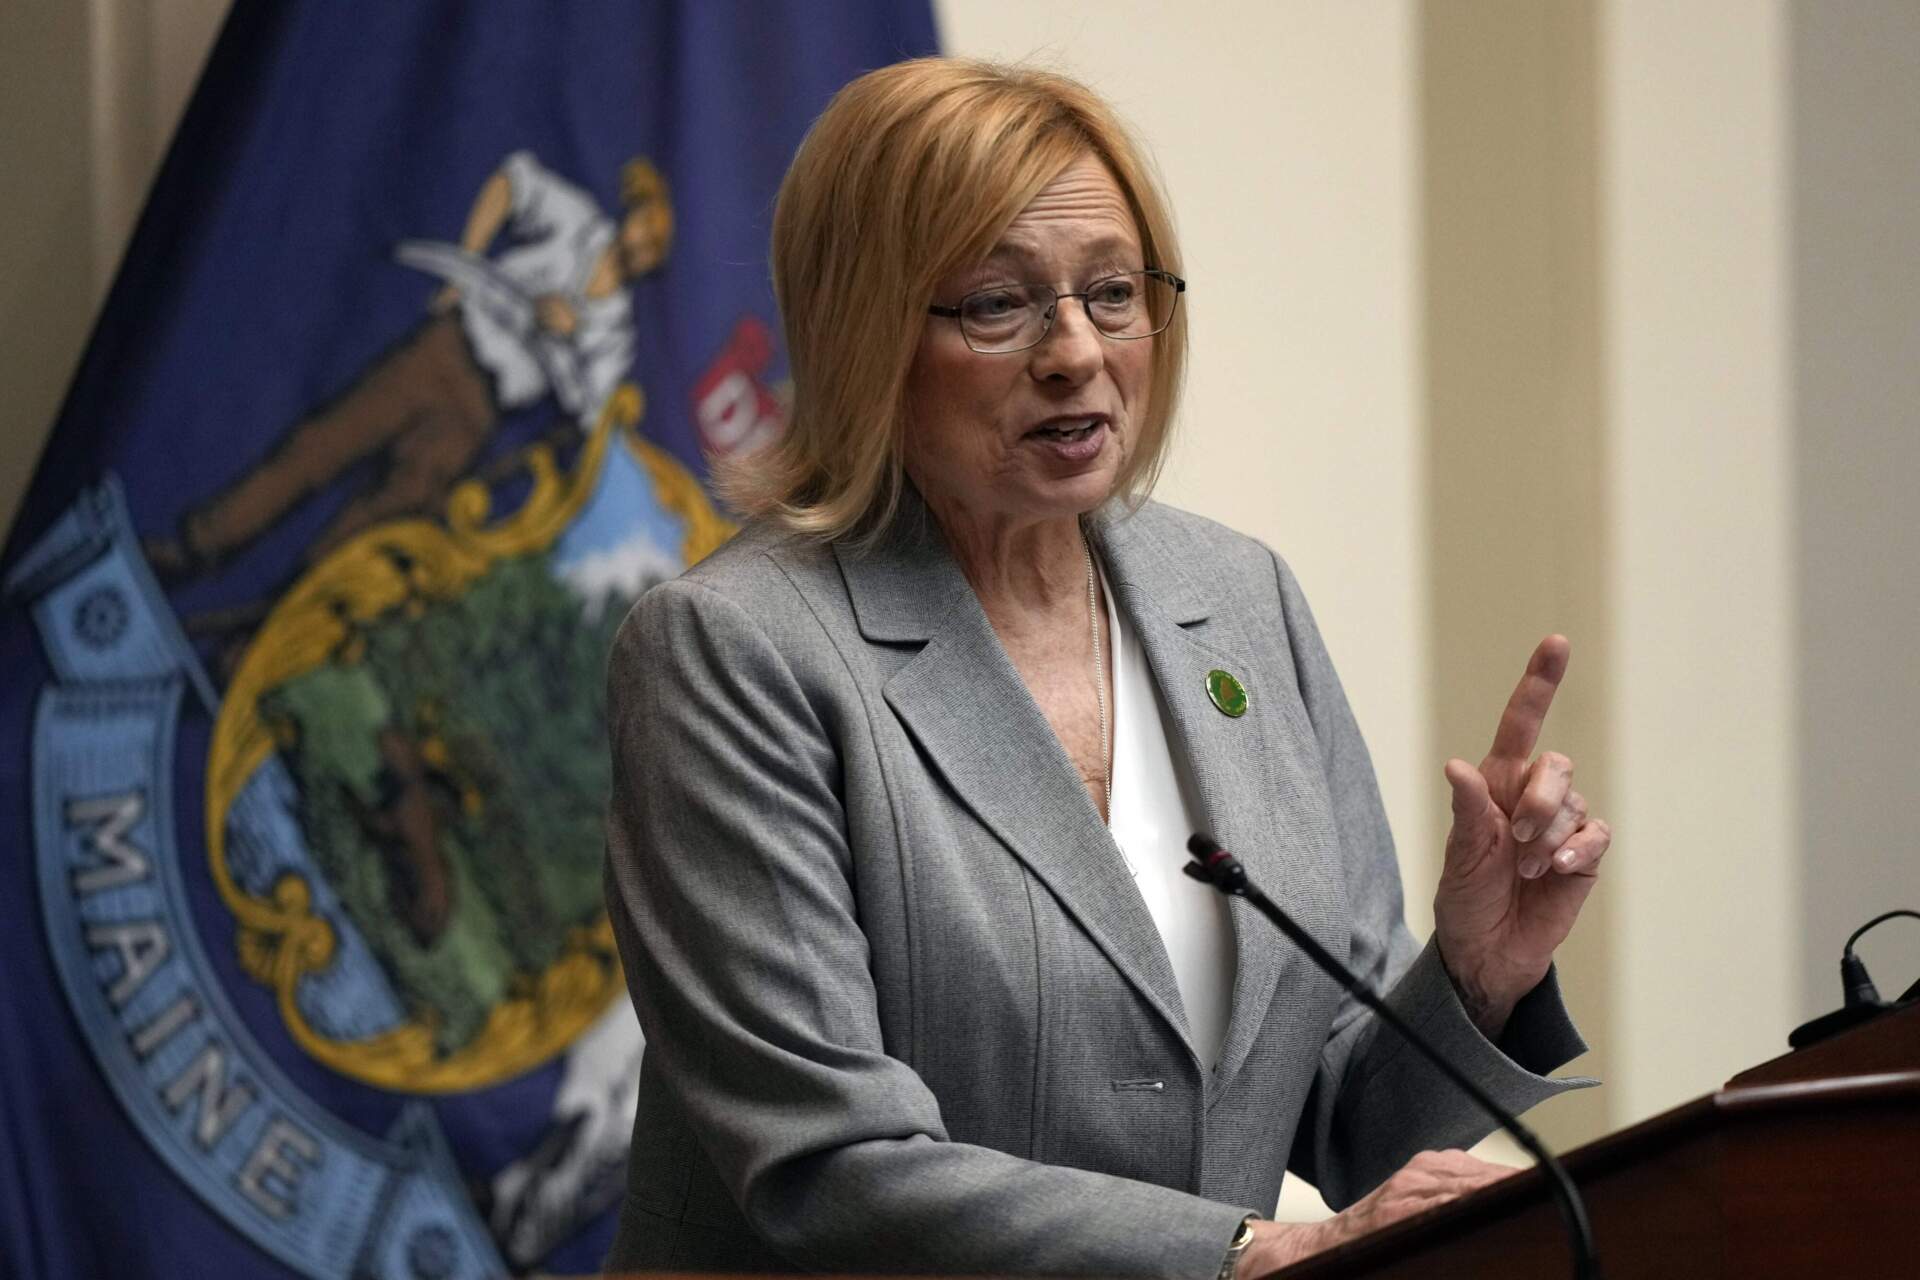 Gov. Janet Mills vetoed a 2021 proposal aimed at closing Maine’s youth prison. Credit: Robert F. Bukaty/Associated Press